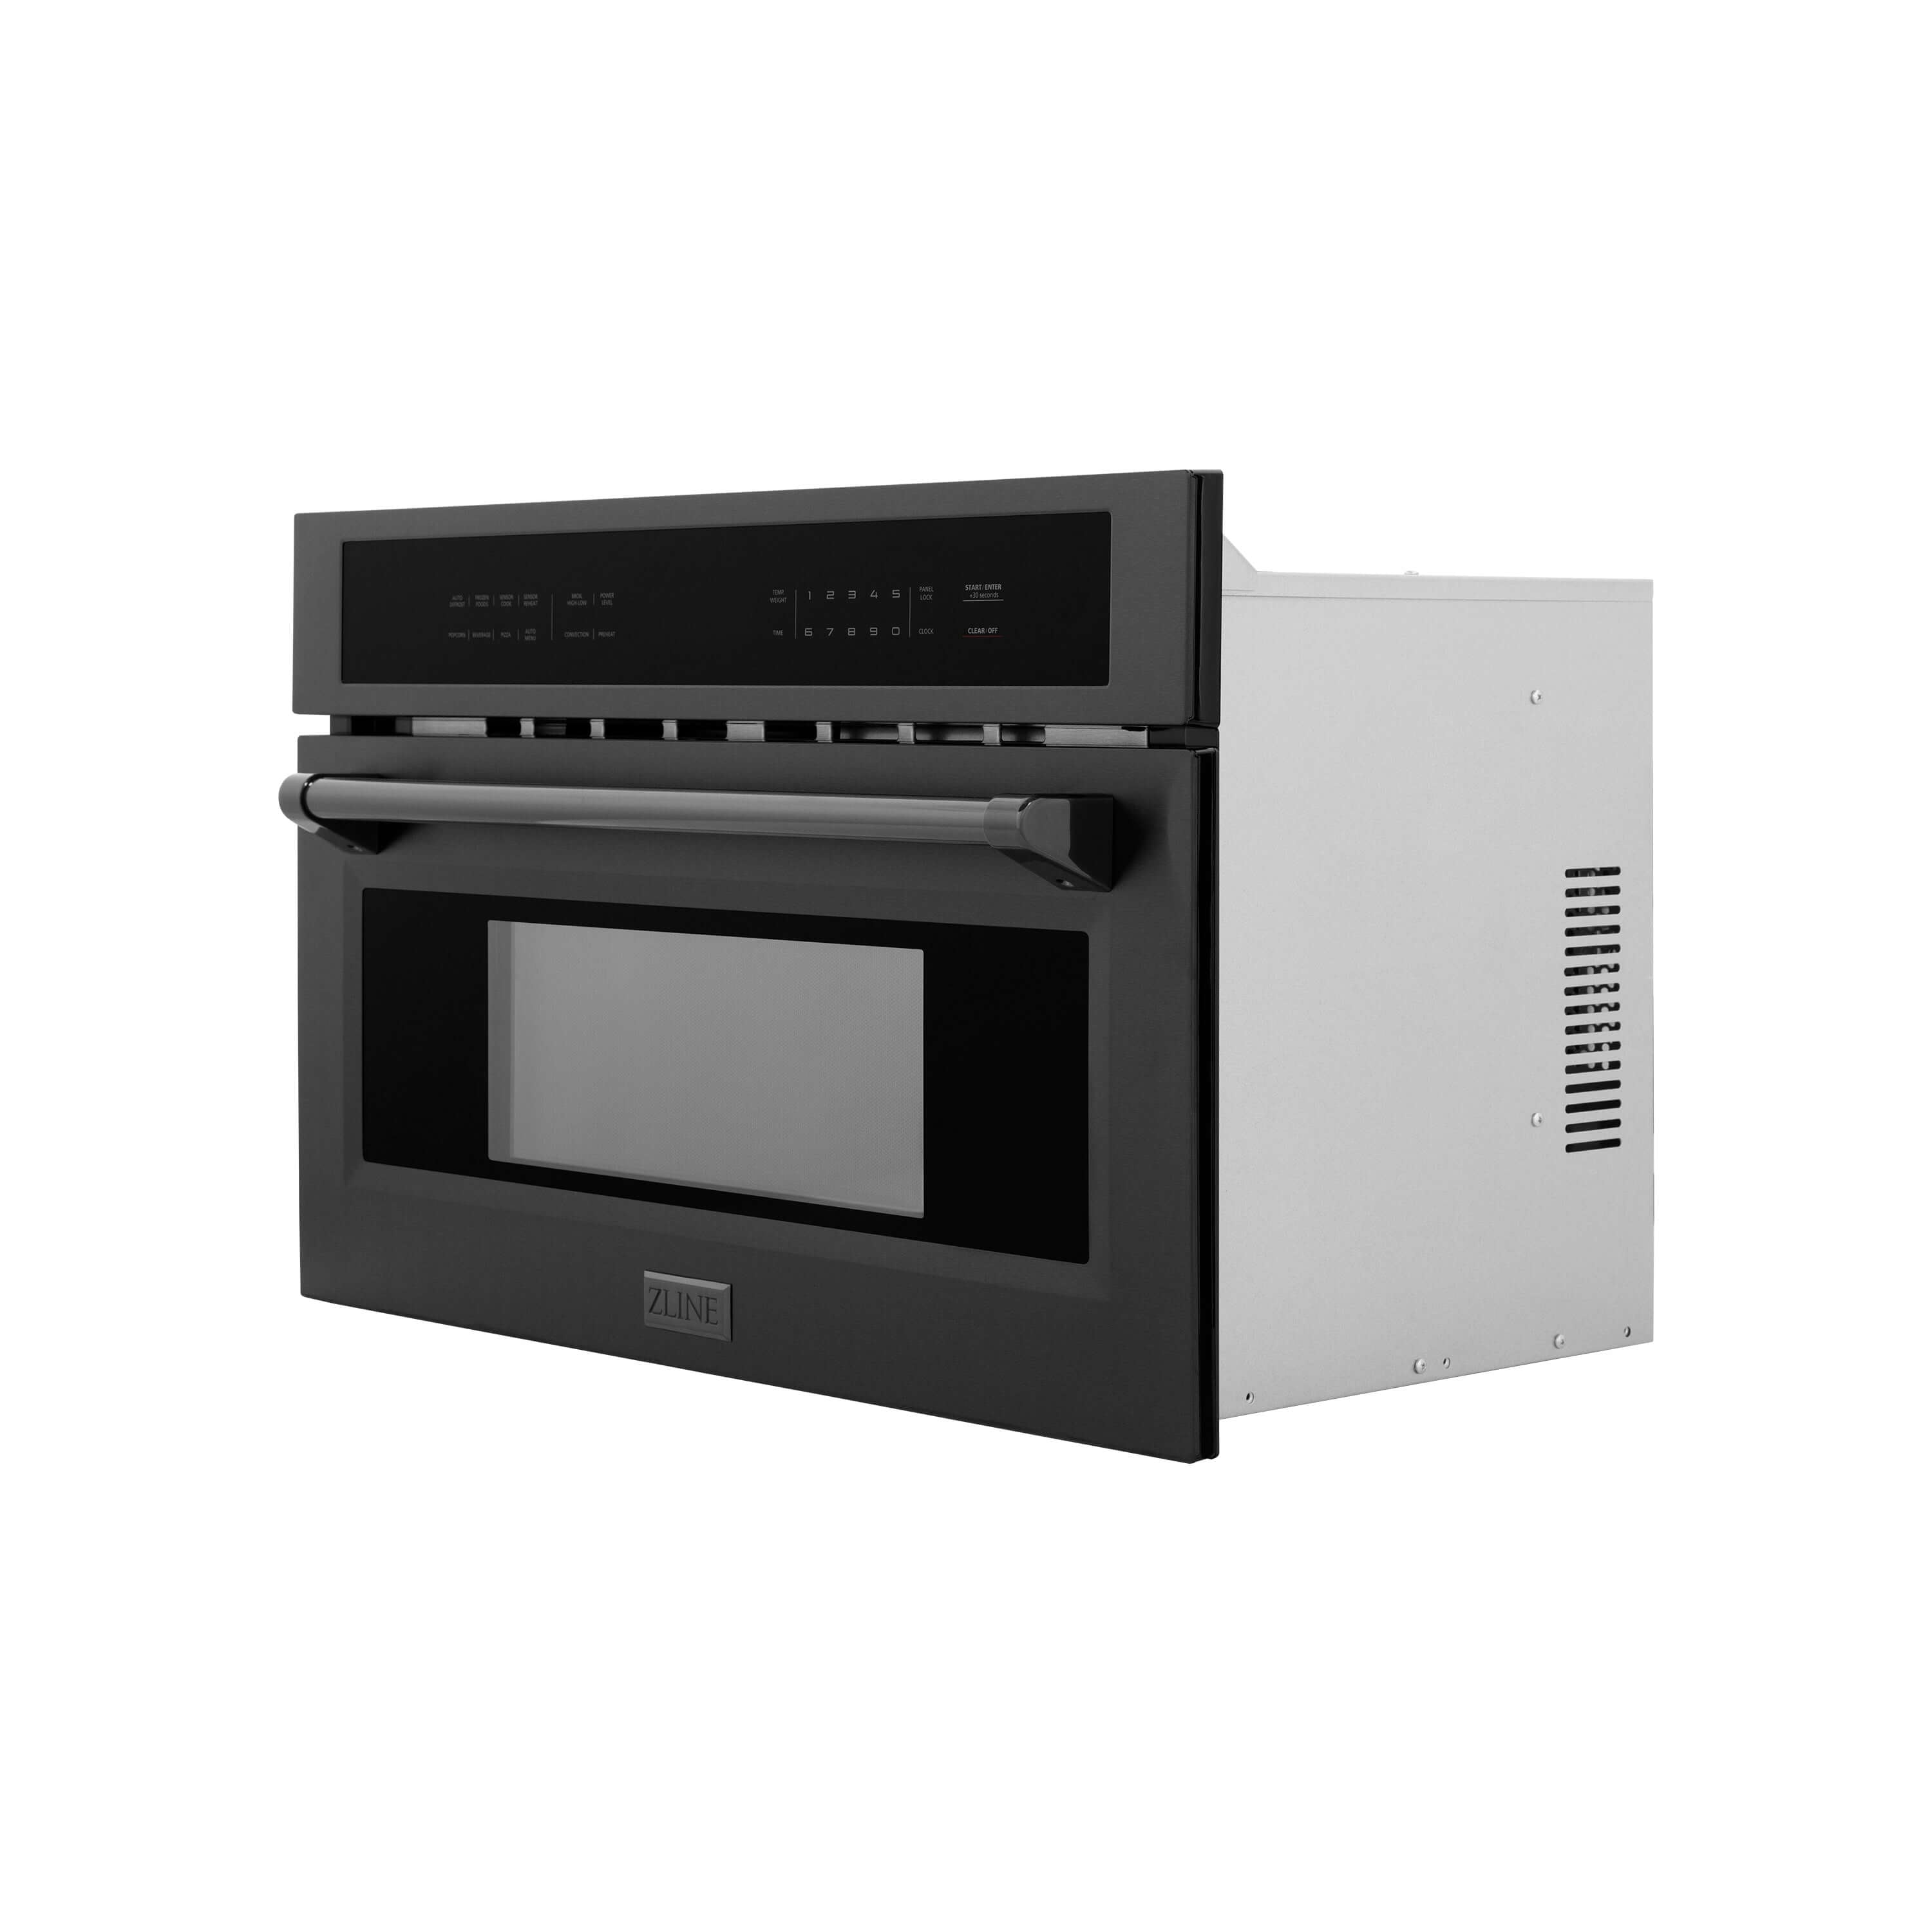 ZLINE 30‚Äö√Ñ√π 1.6 cu ft. Built-in Convection Microwave Oven in Black Stainless Steel with Speed and Sensor Cooking